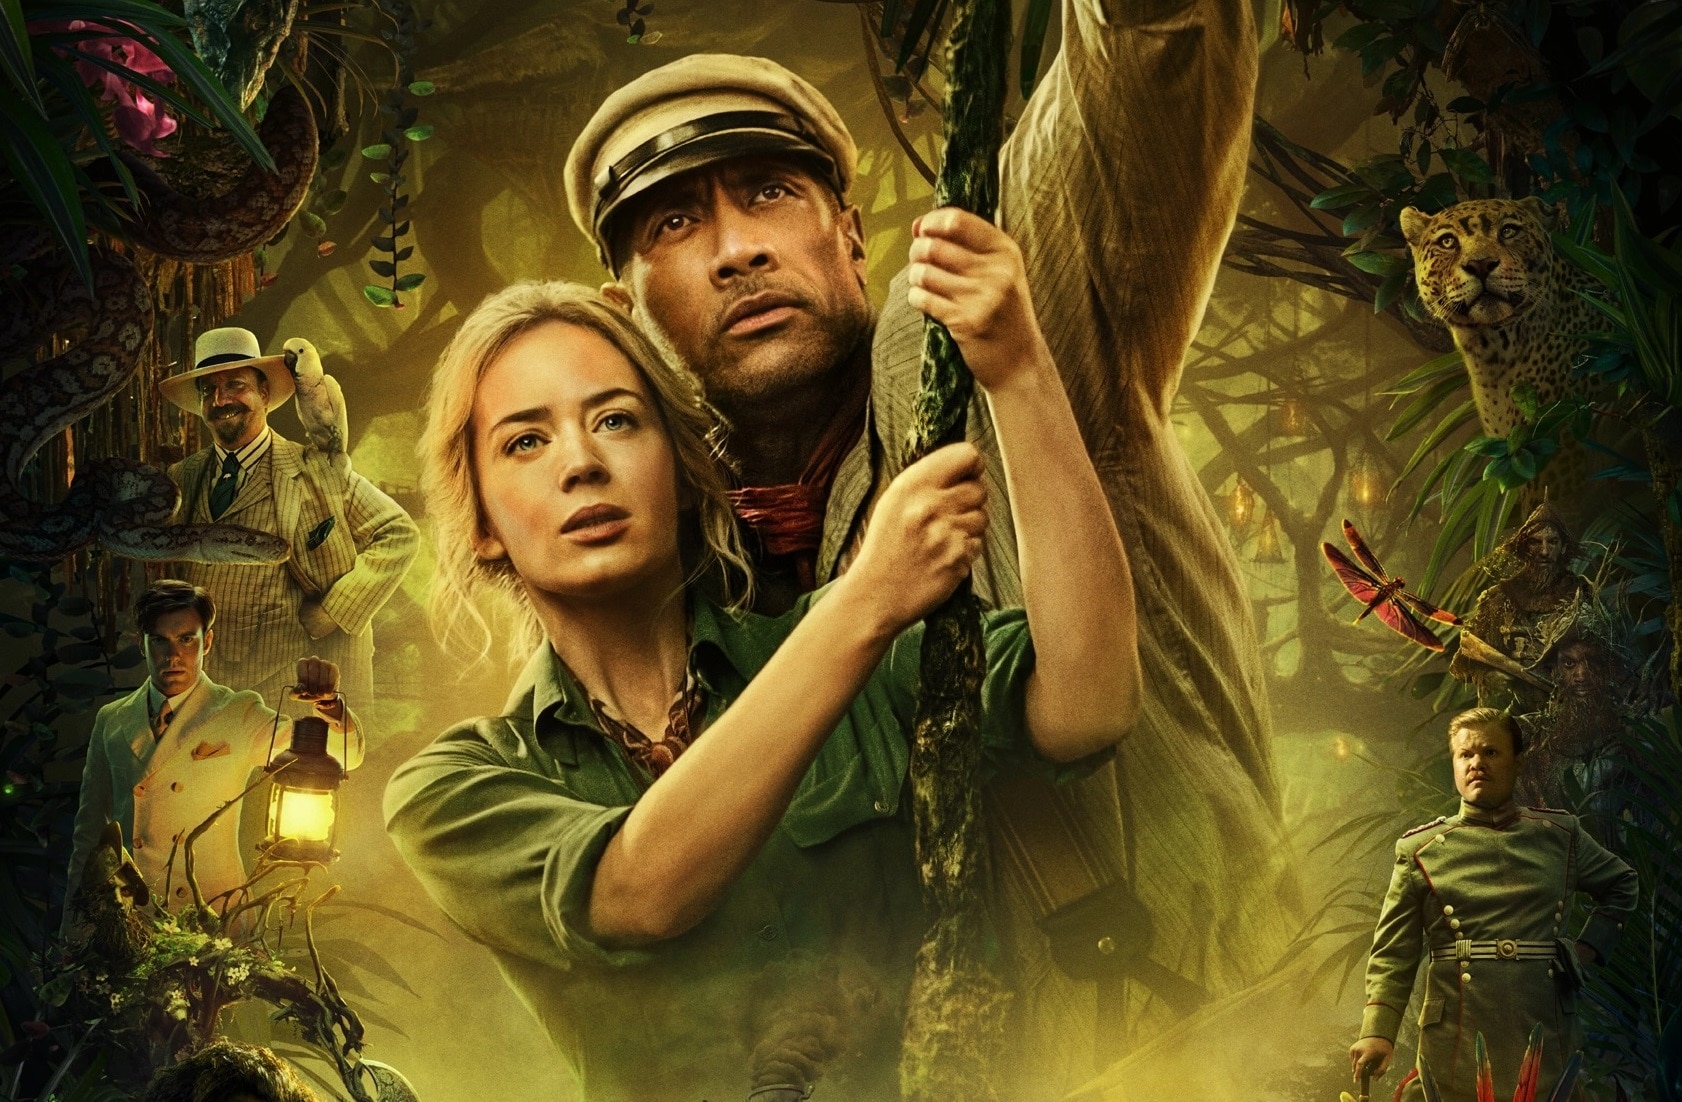 2nd New Trailer For Jungle Cruise Showcases Death-Defying Action and Adventure